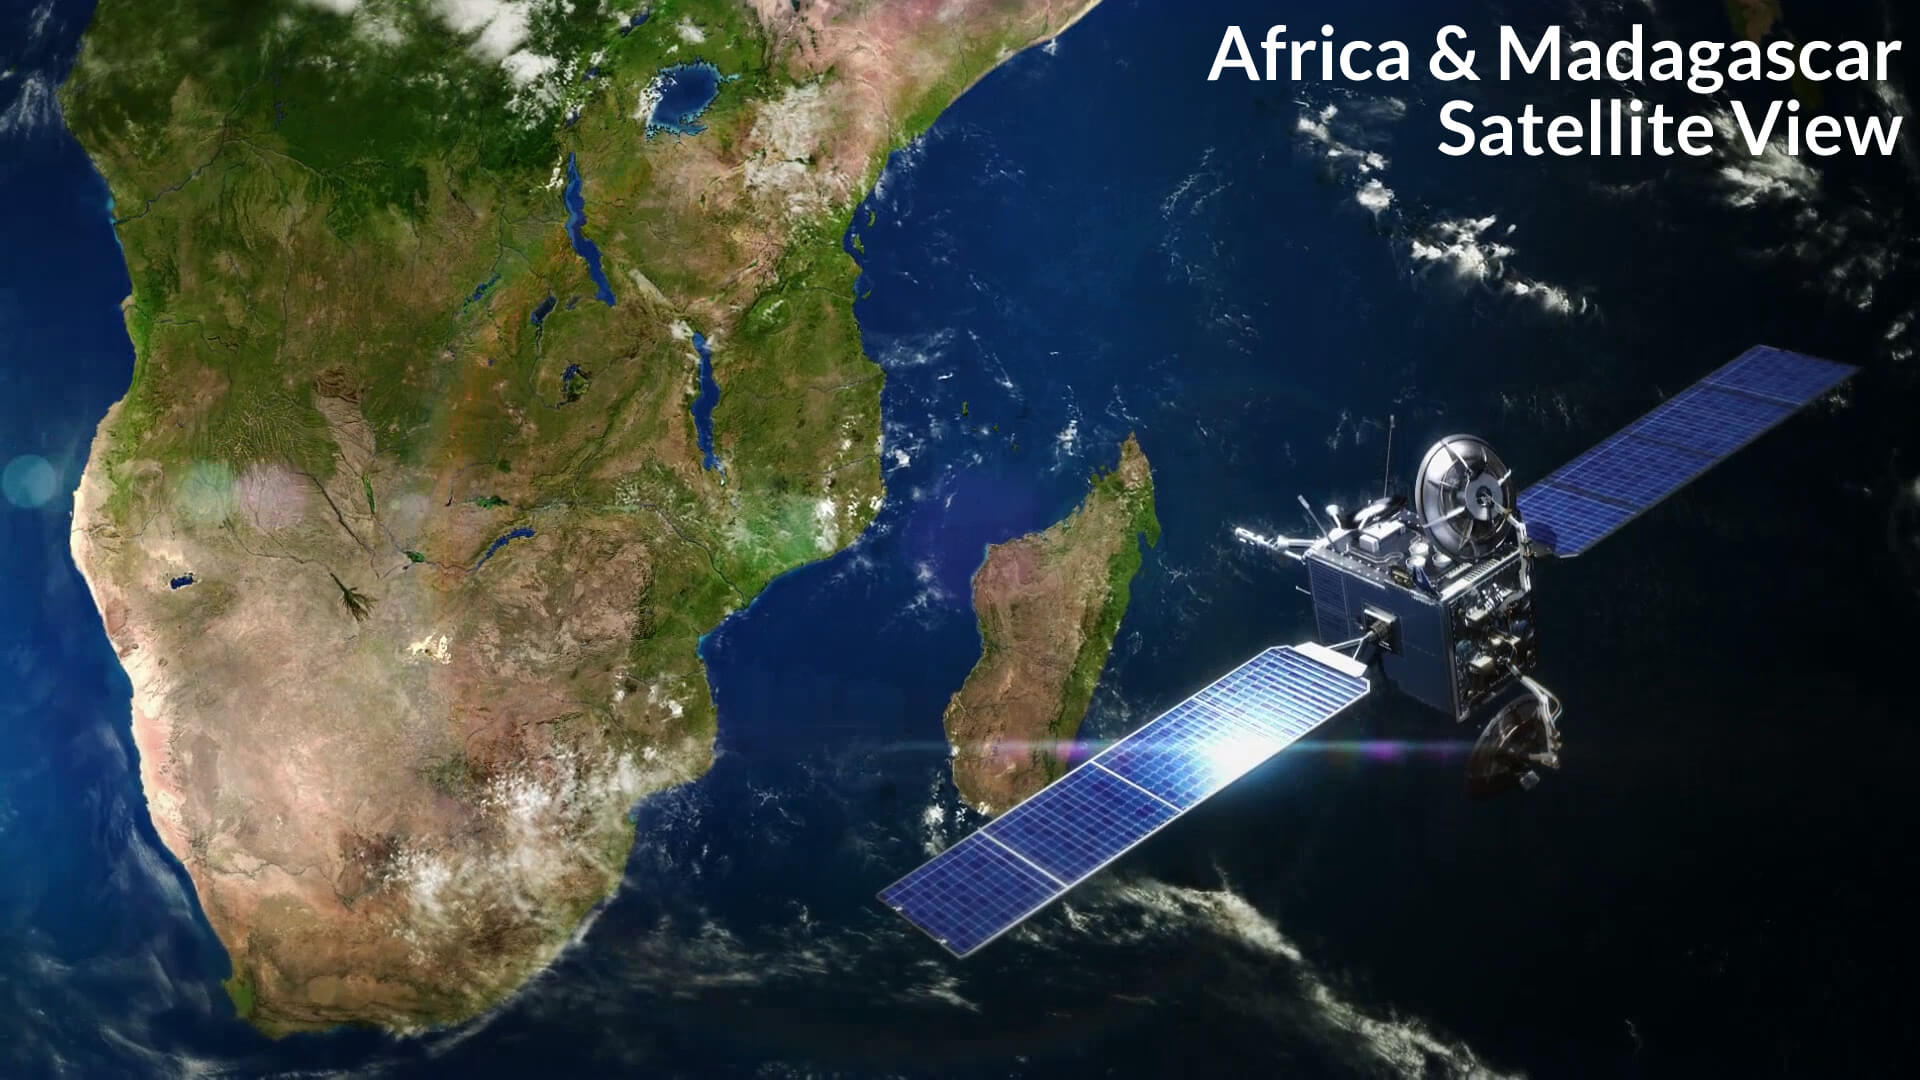 Africa and Madagascar Satellite View